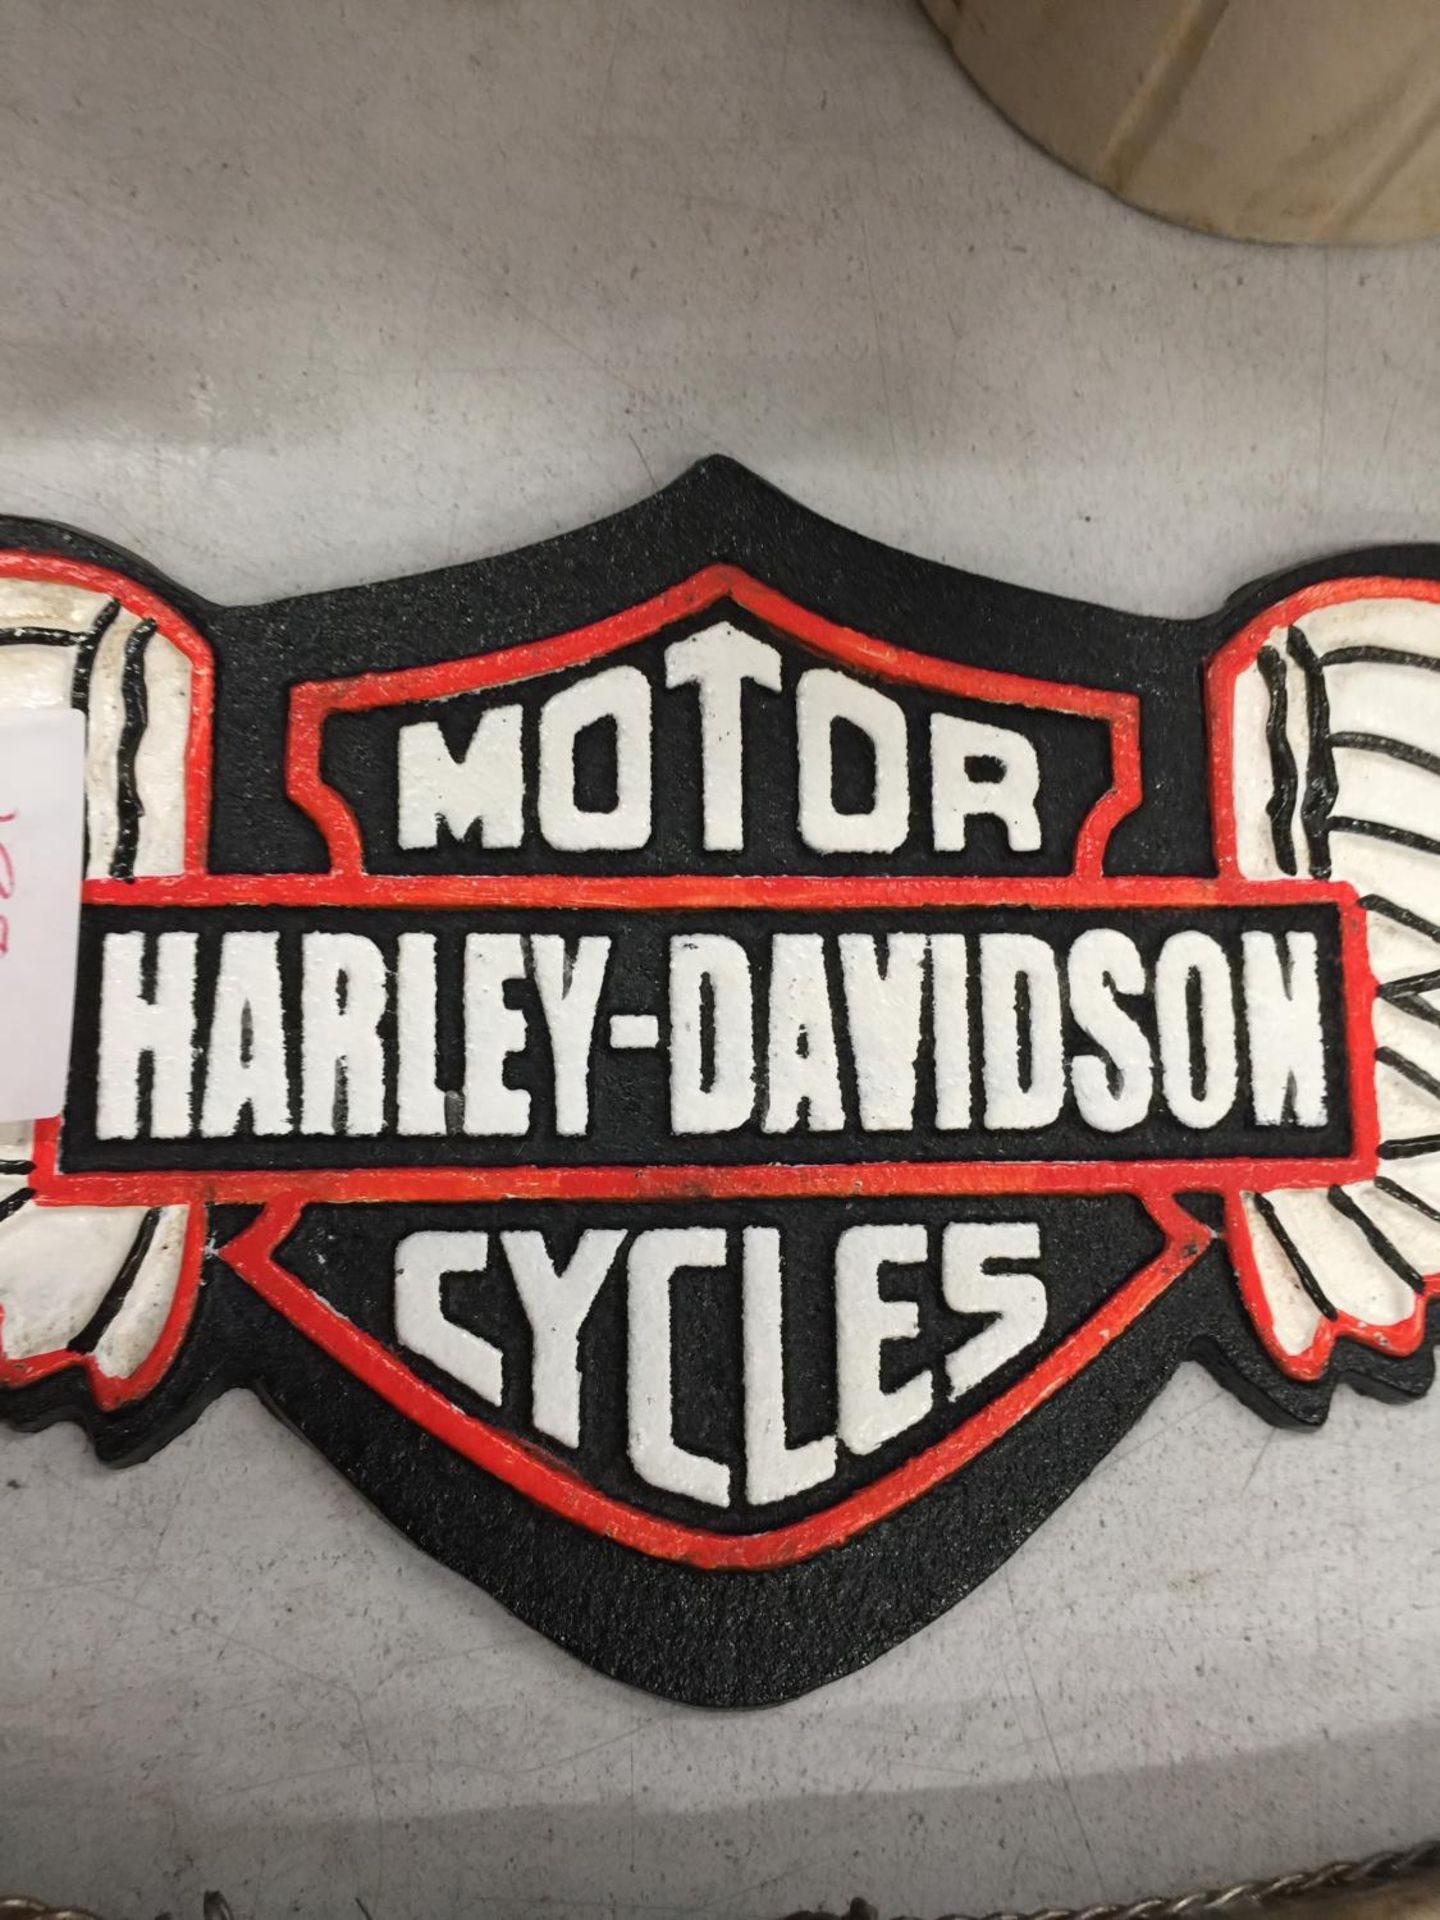 A CAST HARLEY DAVIDSON MOTOR CYCLE SIGN - Image 2 of 2